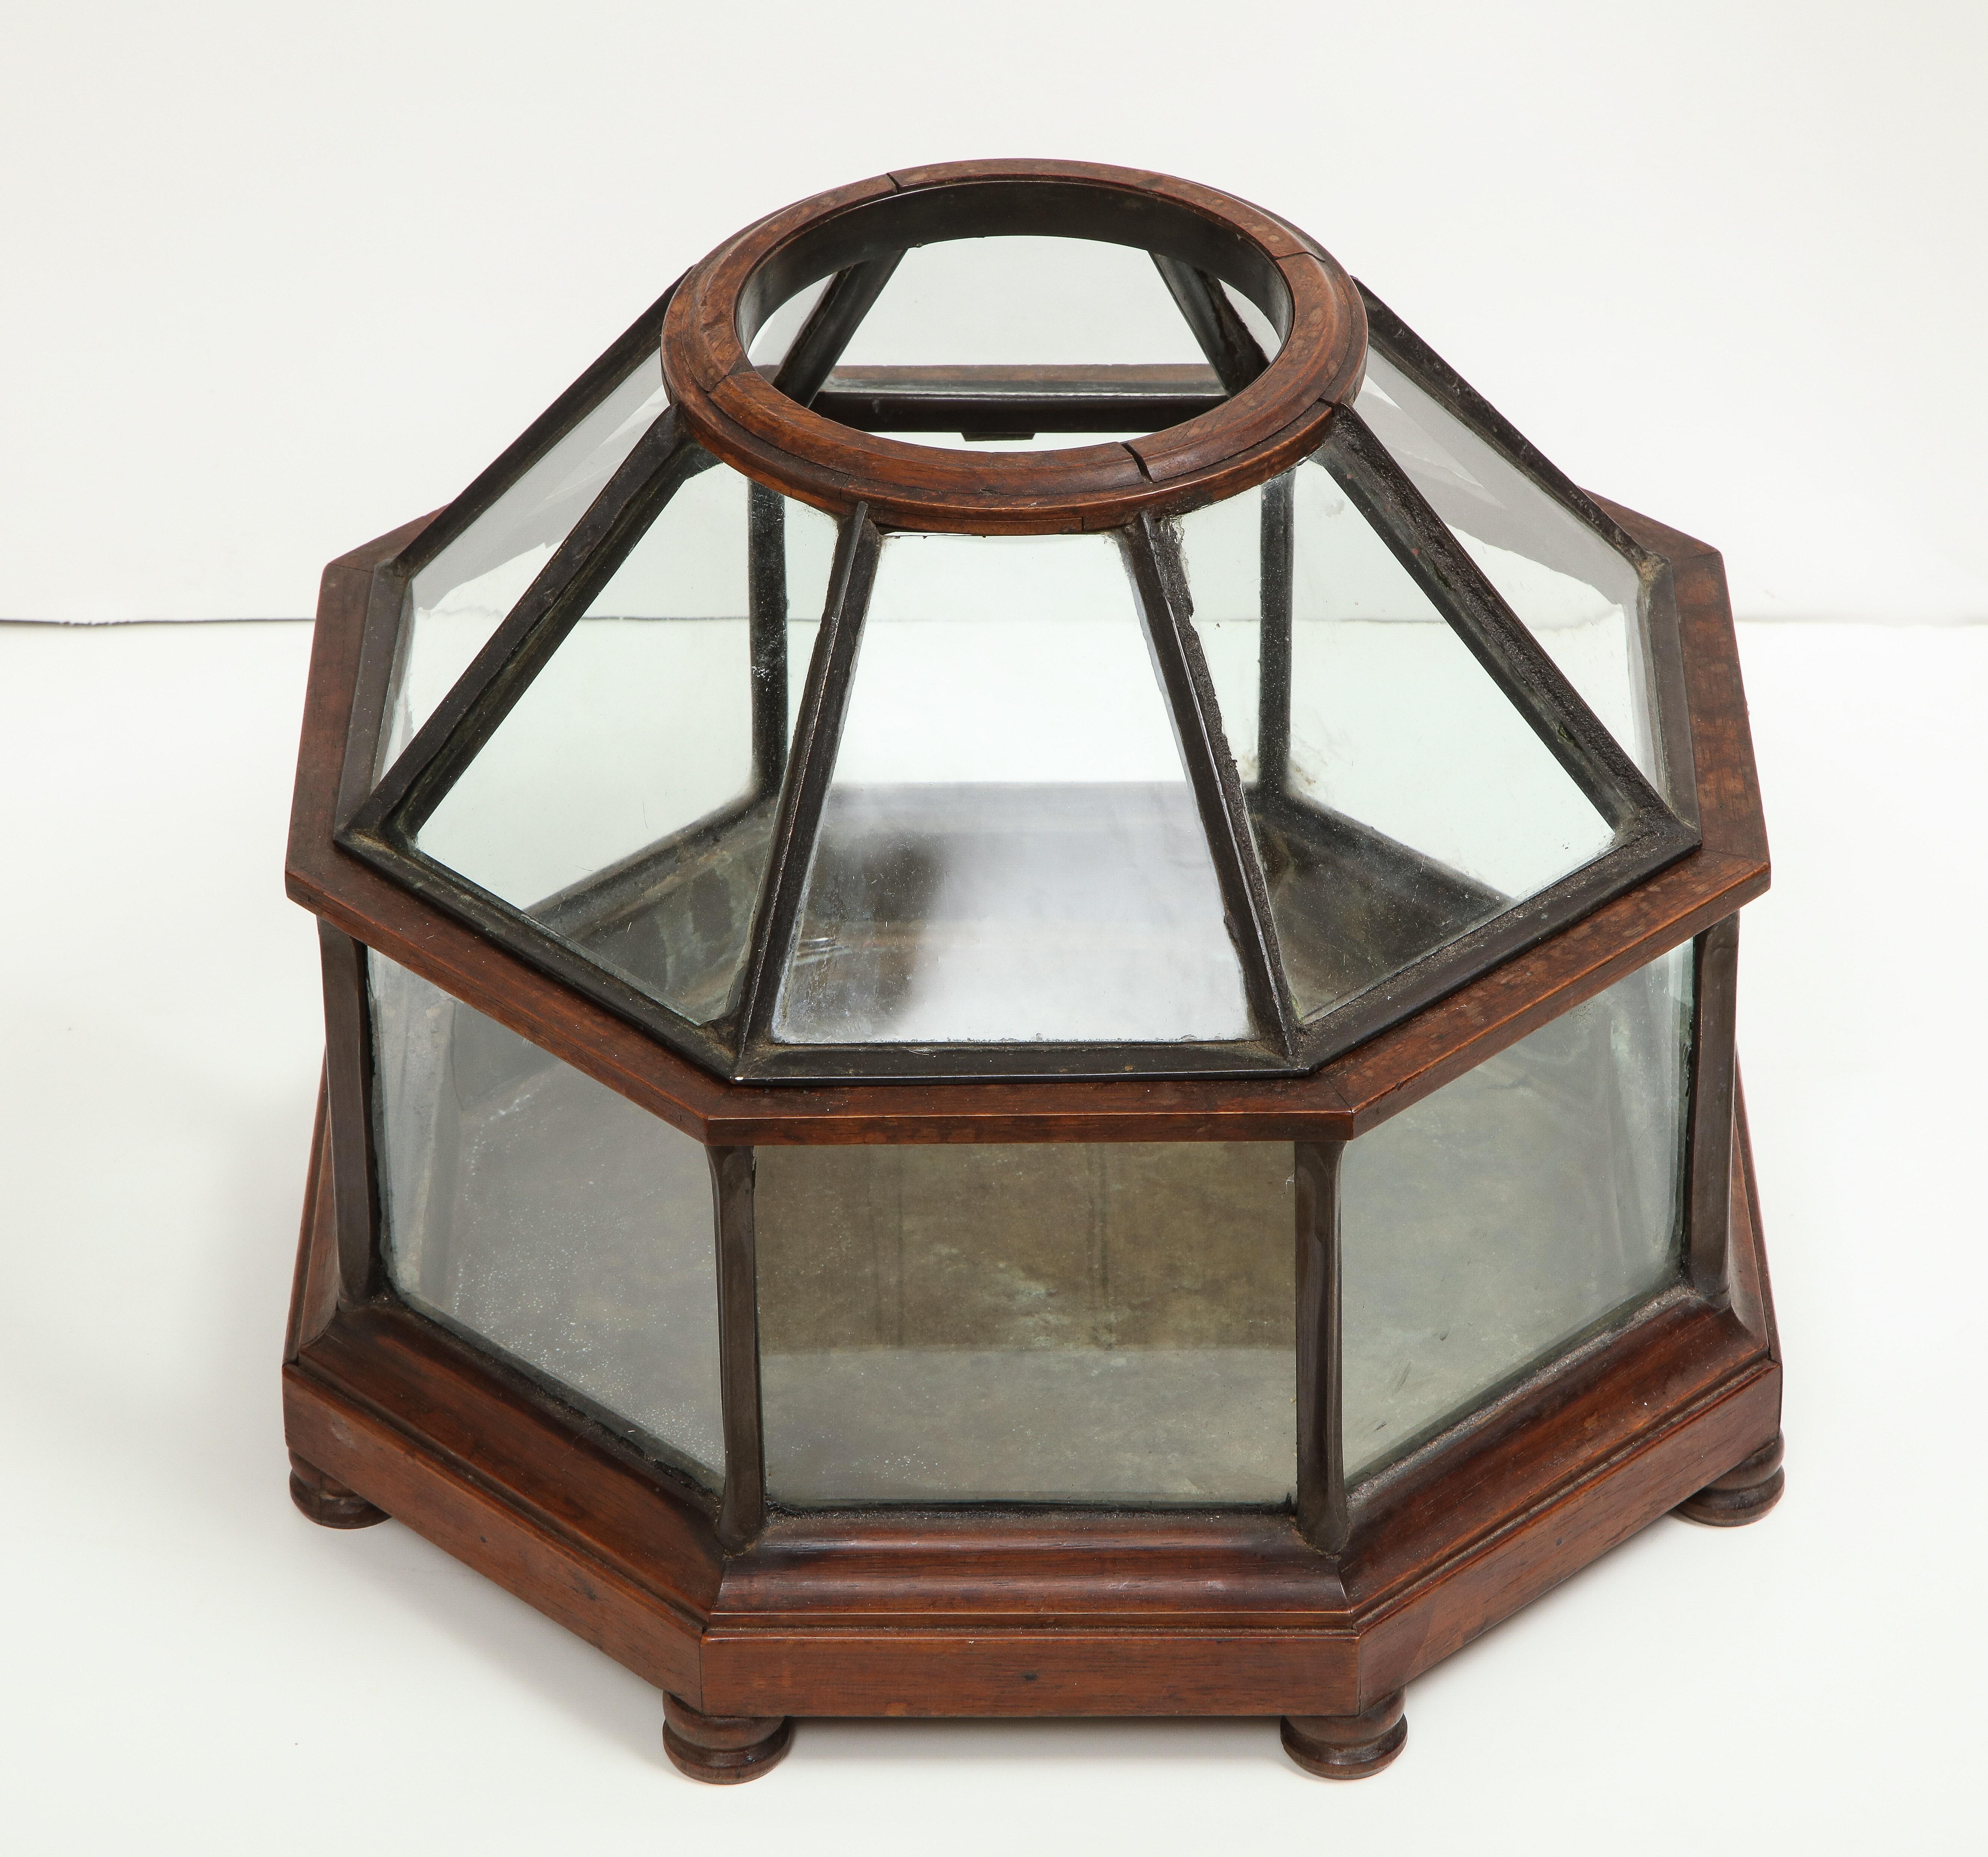 A charming vintage terrarium with mahogany and iron frame in the shape of an octagon. The top of the base is removable for plant placement. This would make a lovely centerpiece, filled with plants or candles.